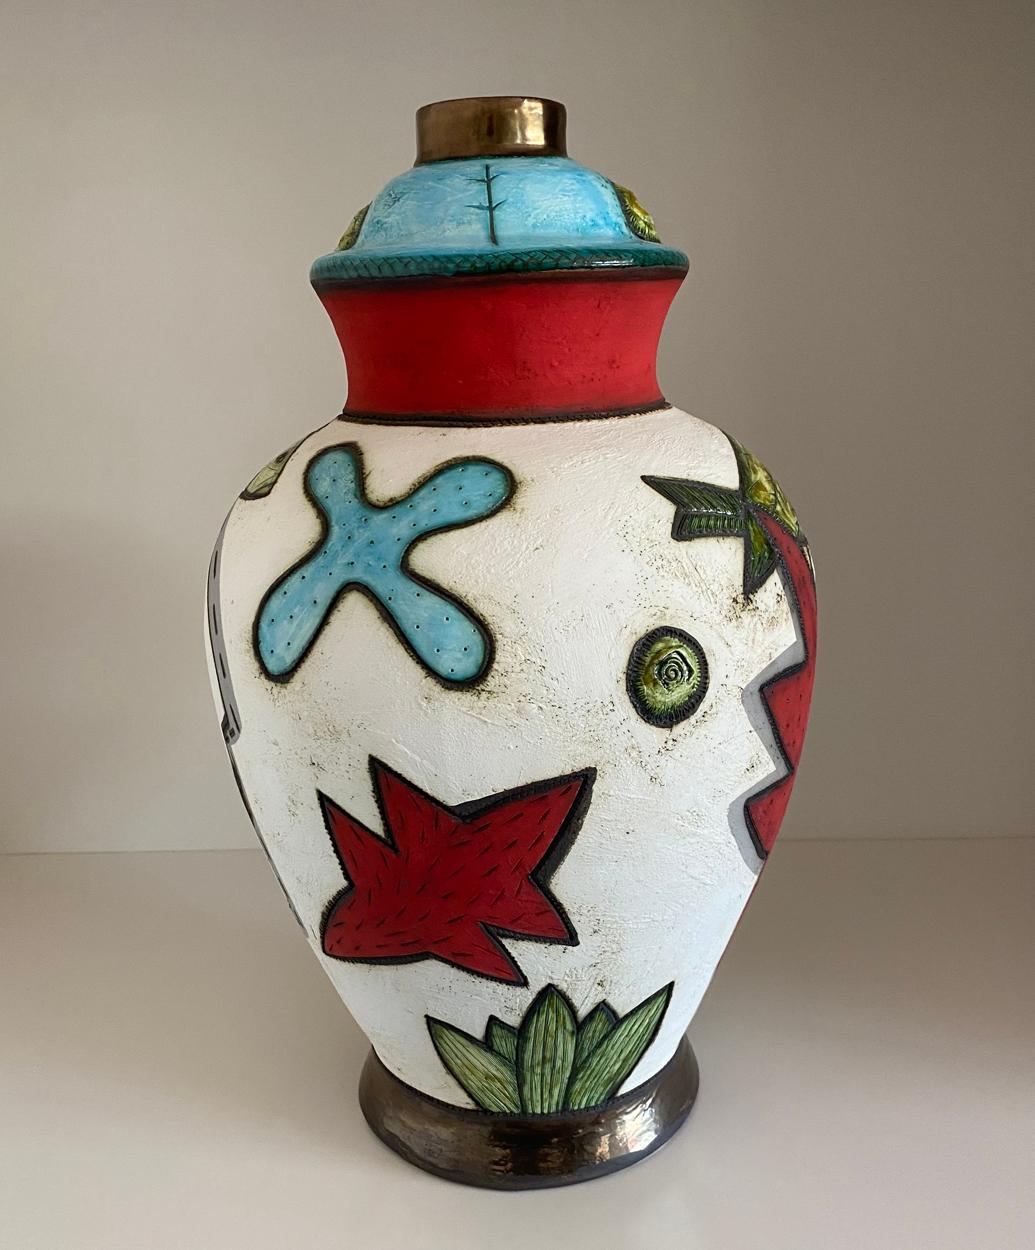 A major piece - large pottery vase by widely collected South African ceramicist Charmaine Haines, produced 2020.


Charmaine Haines was born in 1963 in Grahamstown and trained under Hylton Nel at the Port Elizabeth Technikon and obtained a Higher